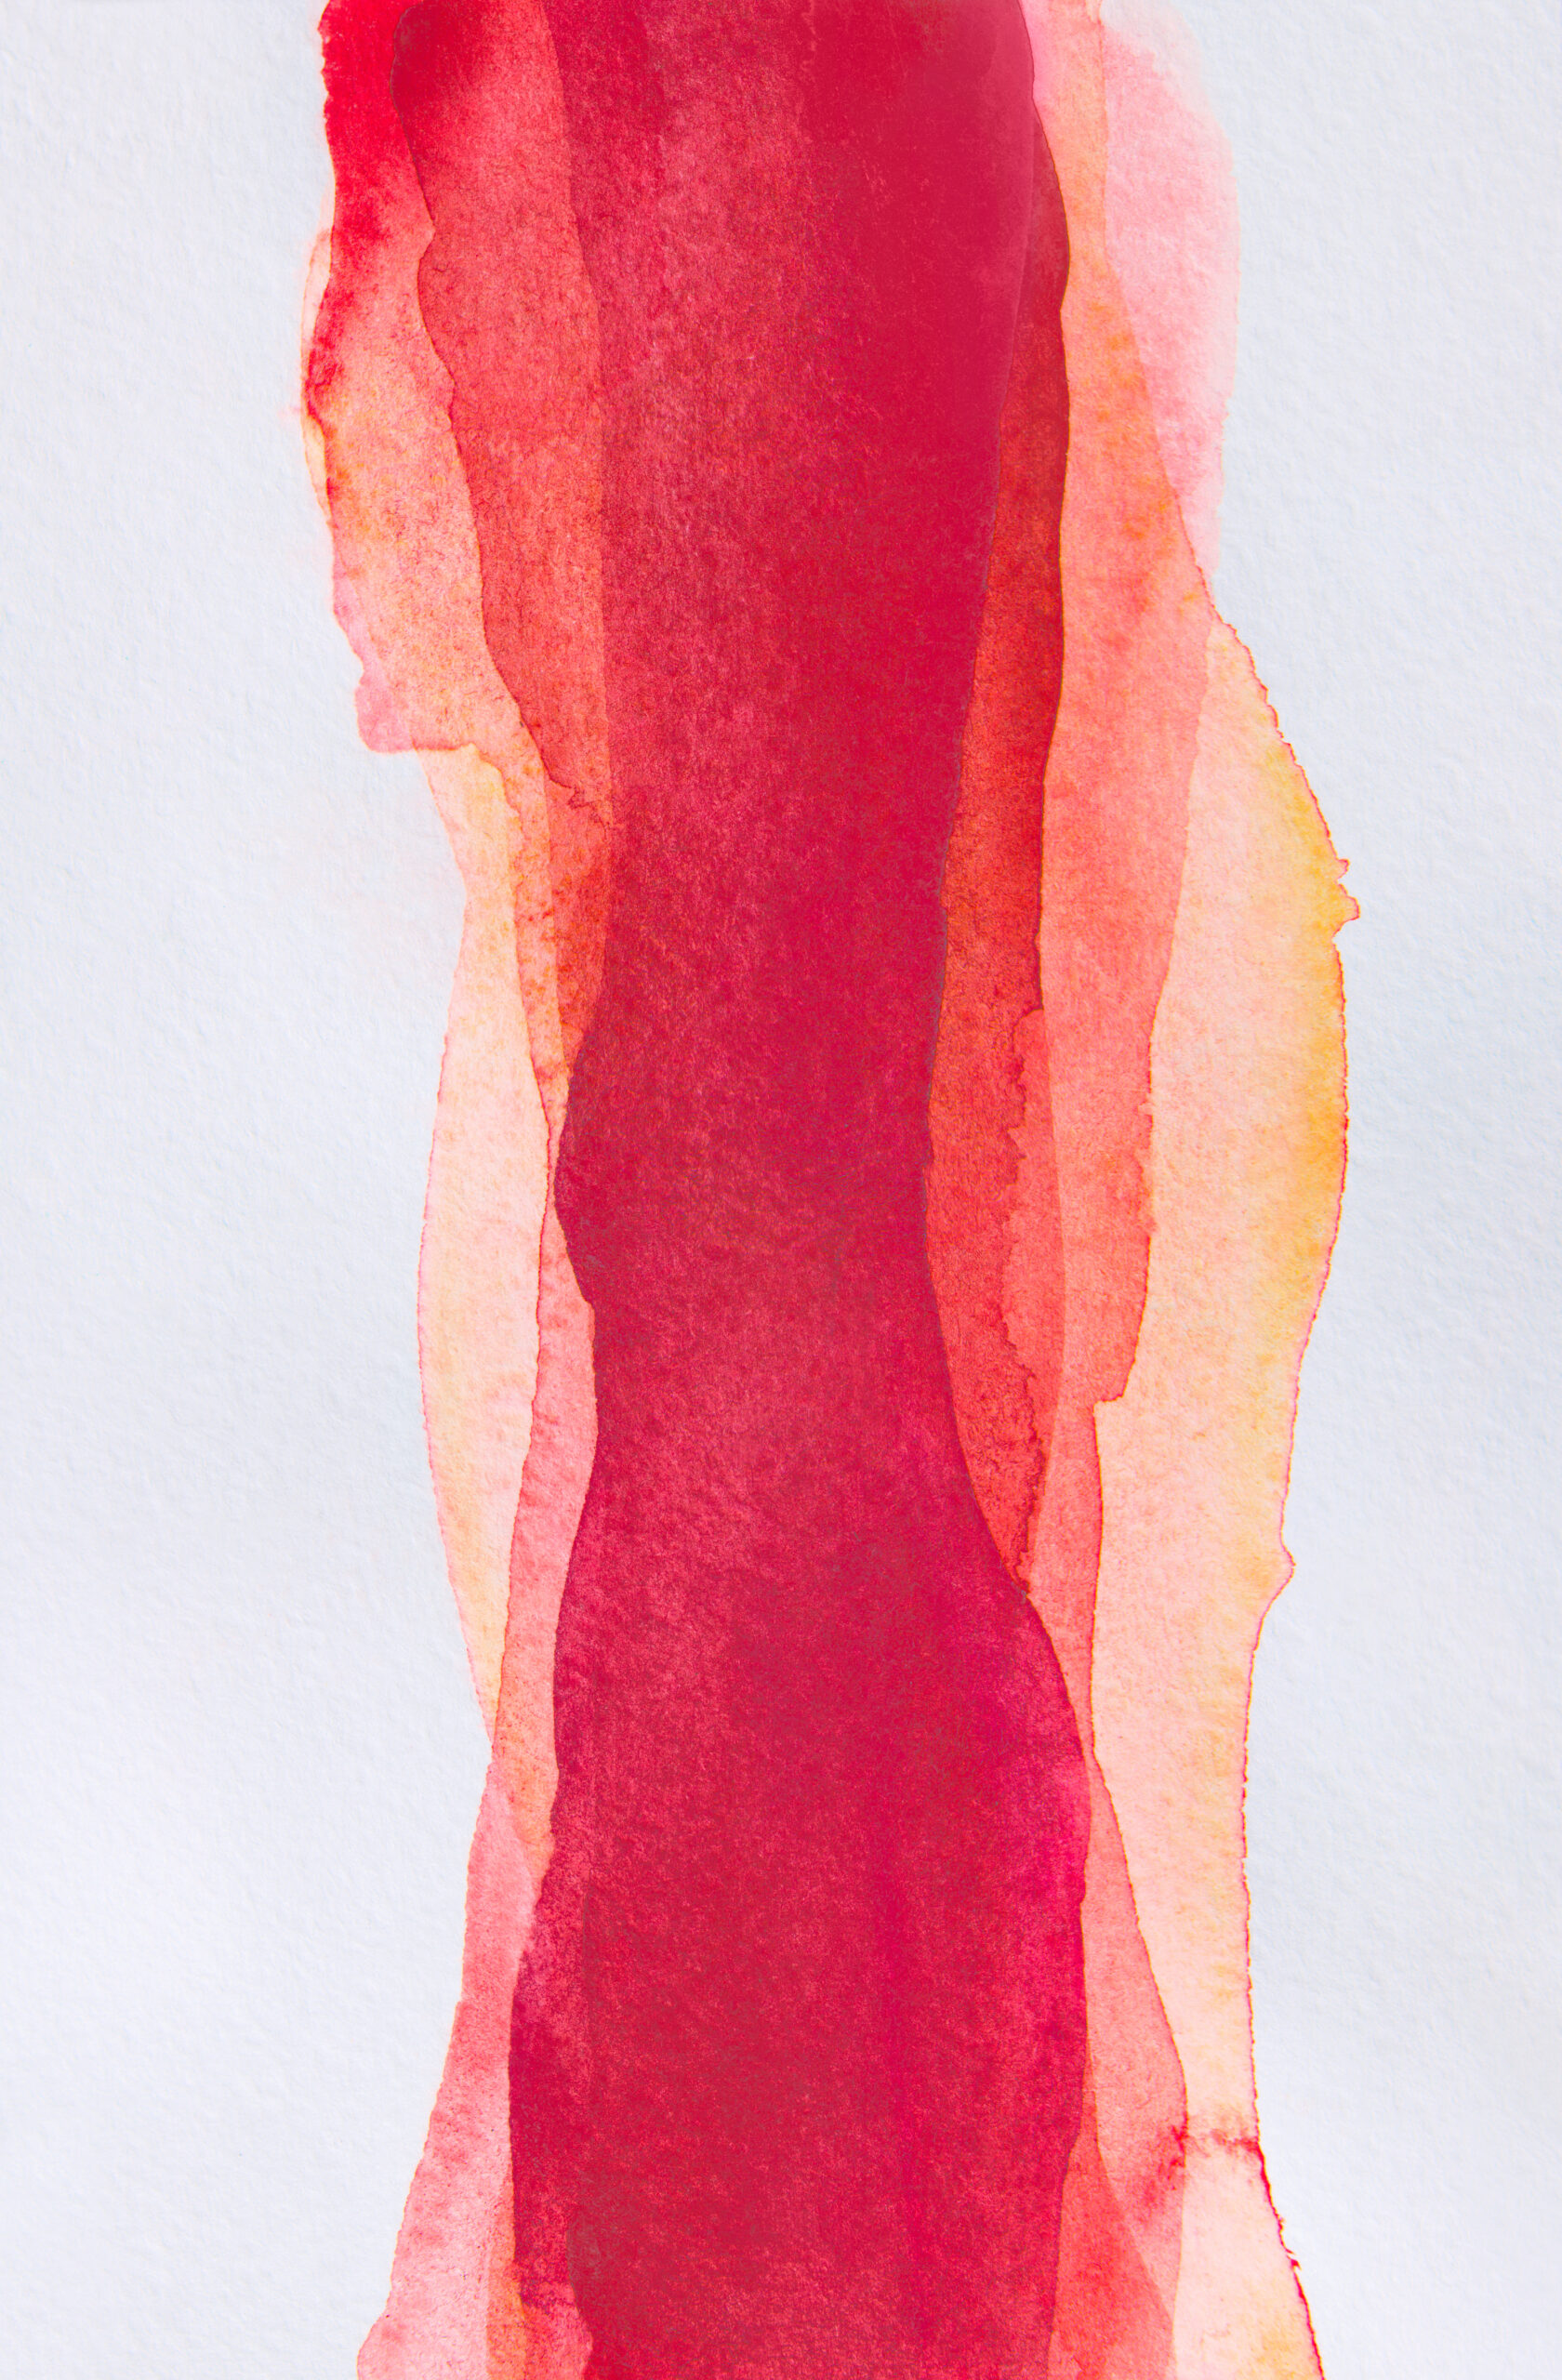 Vertical,Strip,Of,Watercolors.,Red,Multi-layer,Smears